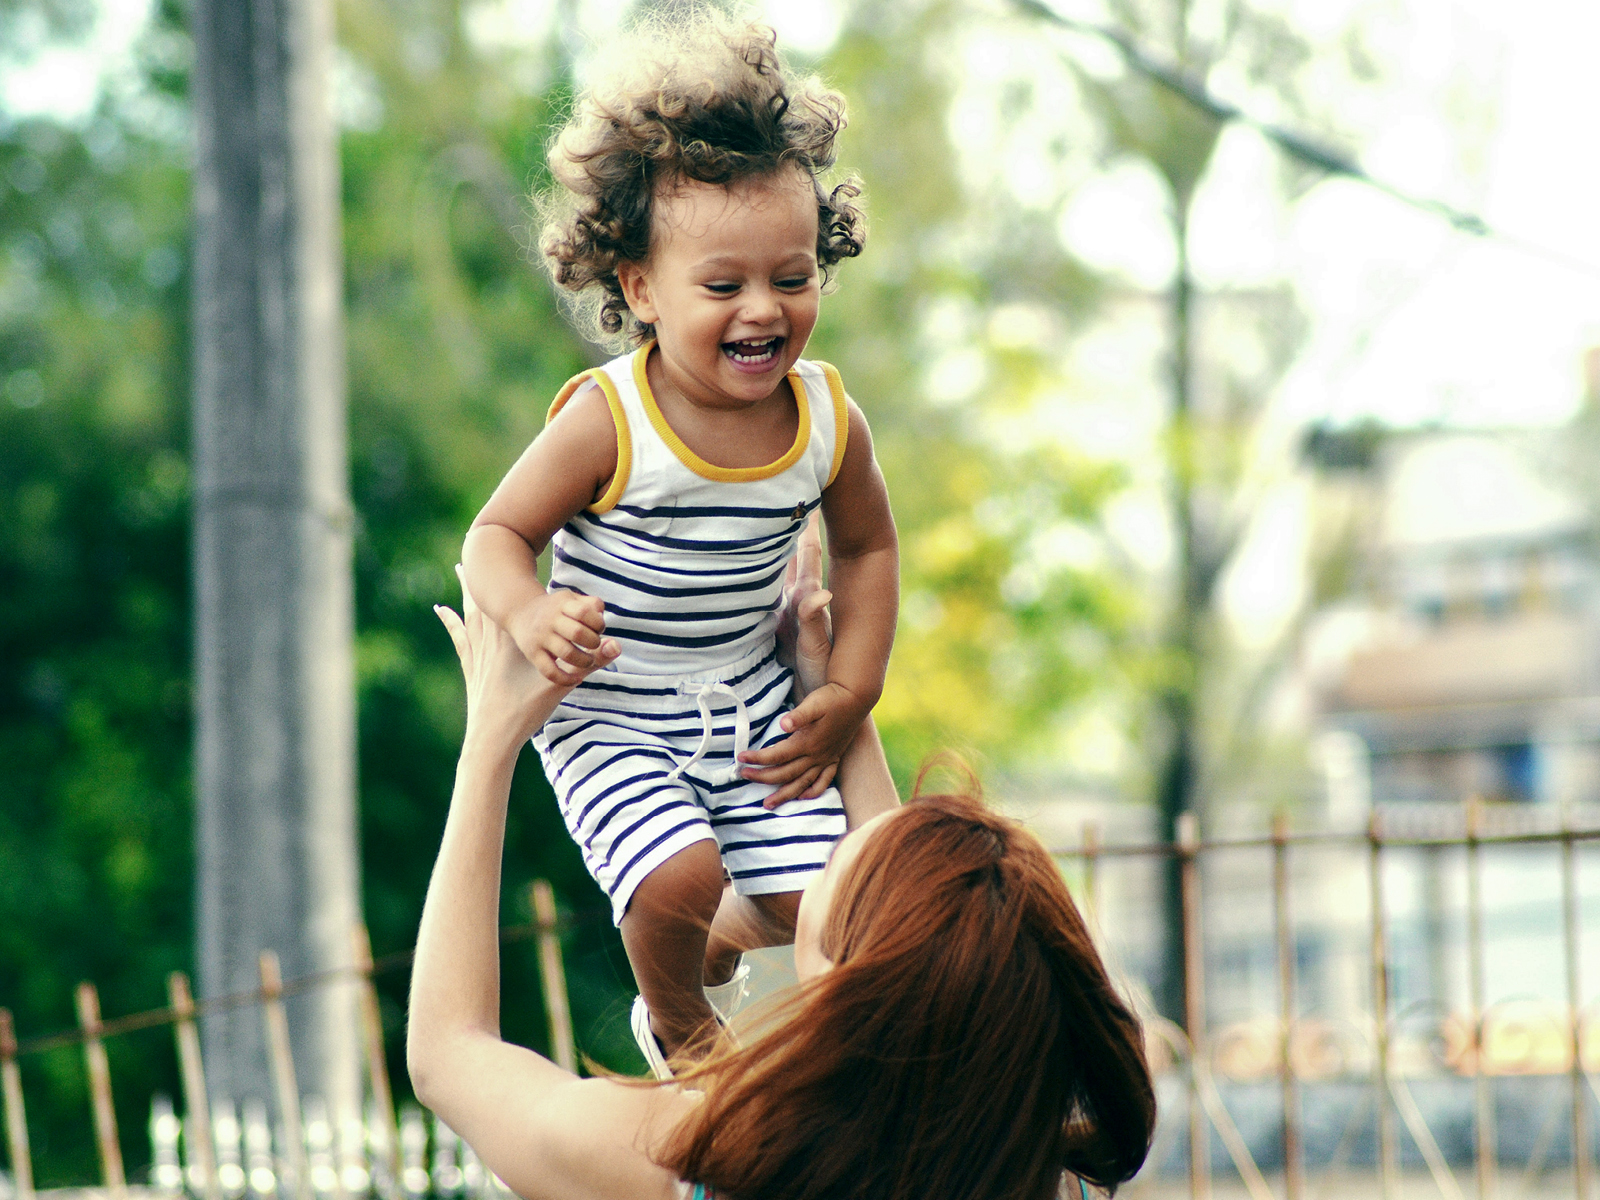 A mother tossing and catching her laughing child